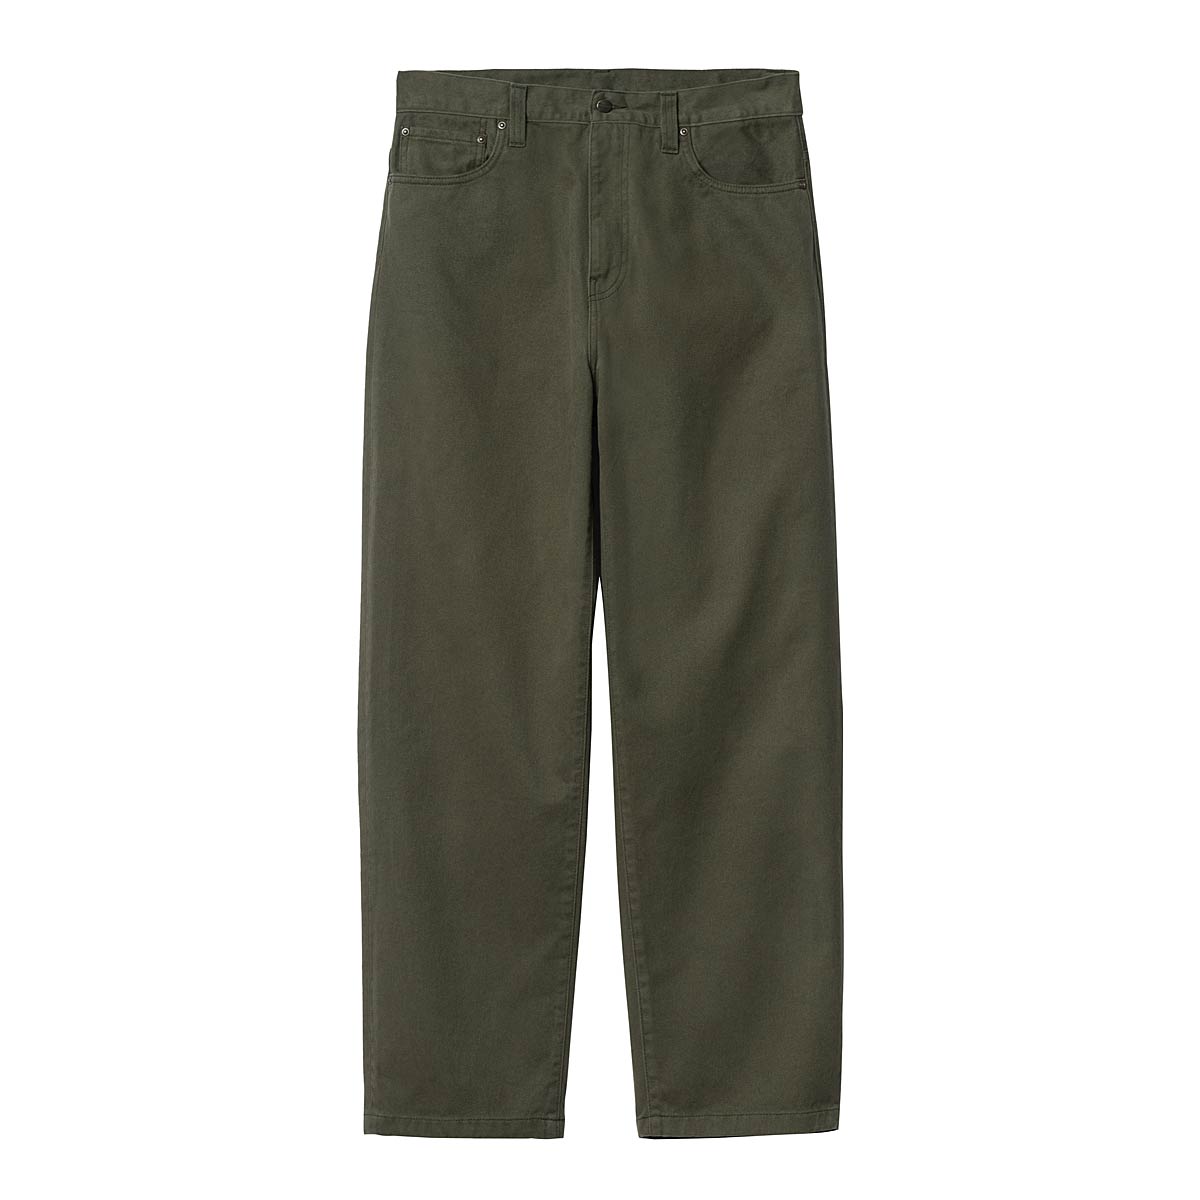 Image of Carhartt Wip Derby Pant, Plant